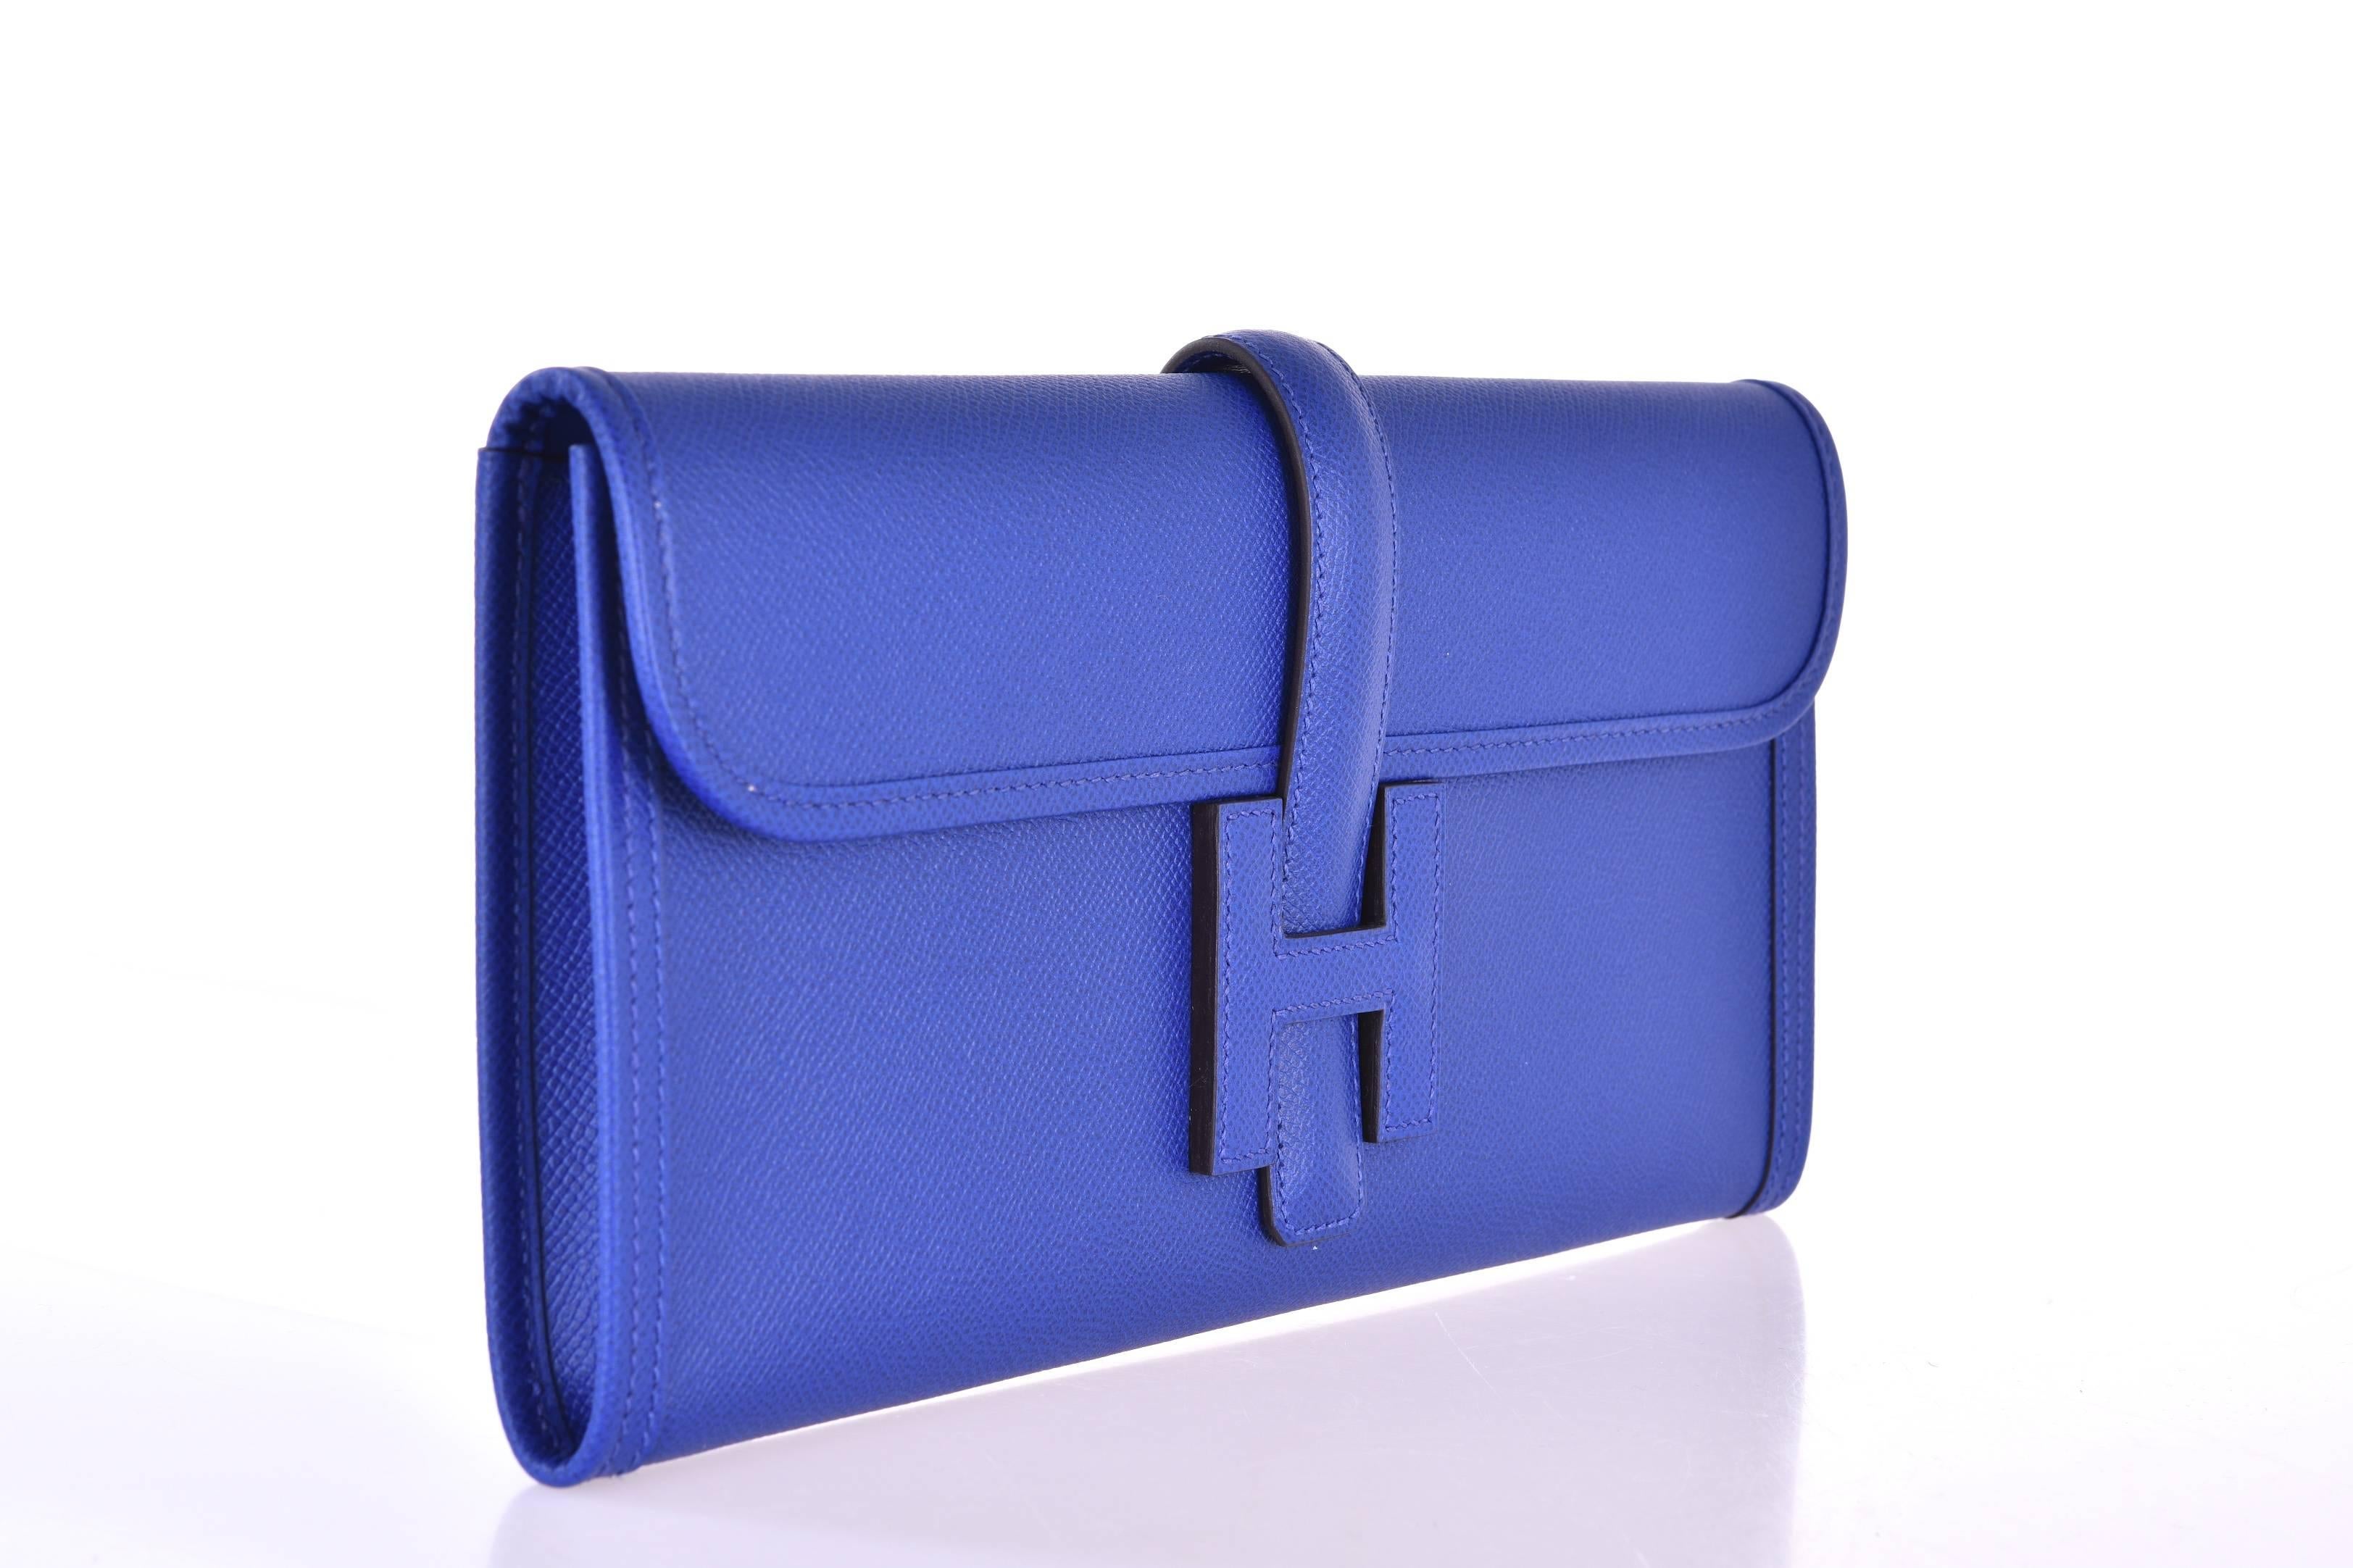 New! Hermes Jige Elan clutch in 29cm Blue Electric, Epsom leather.

 
Condition: New 
 
Measurements:  11.5